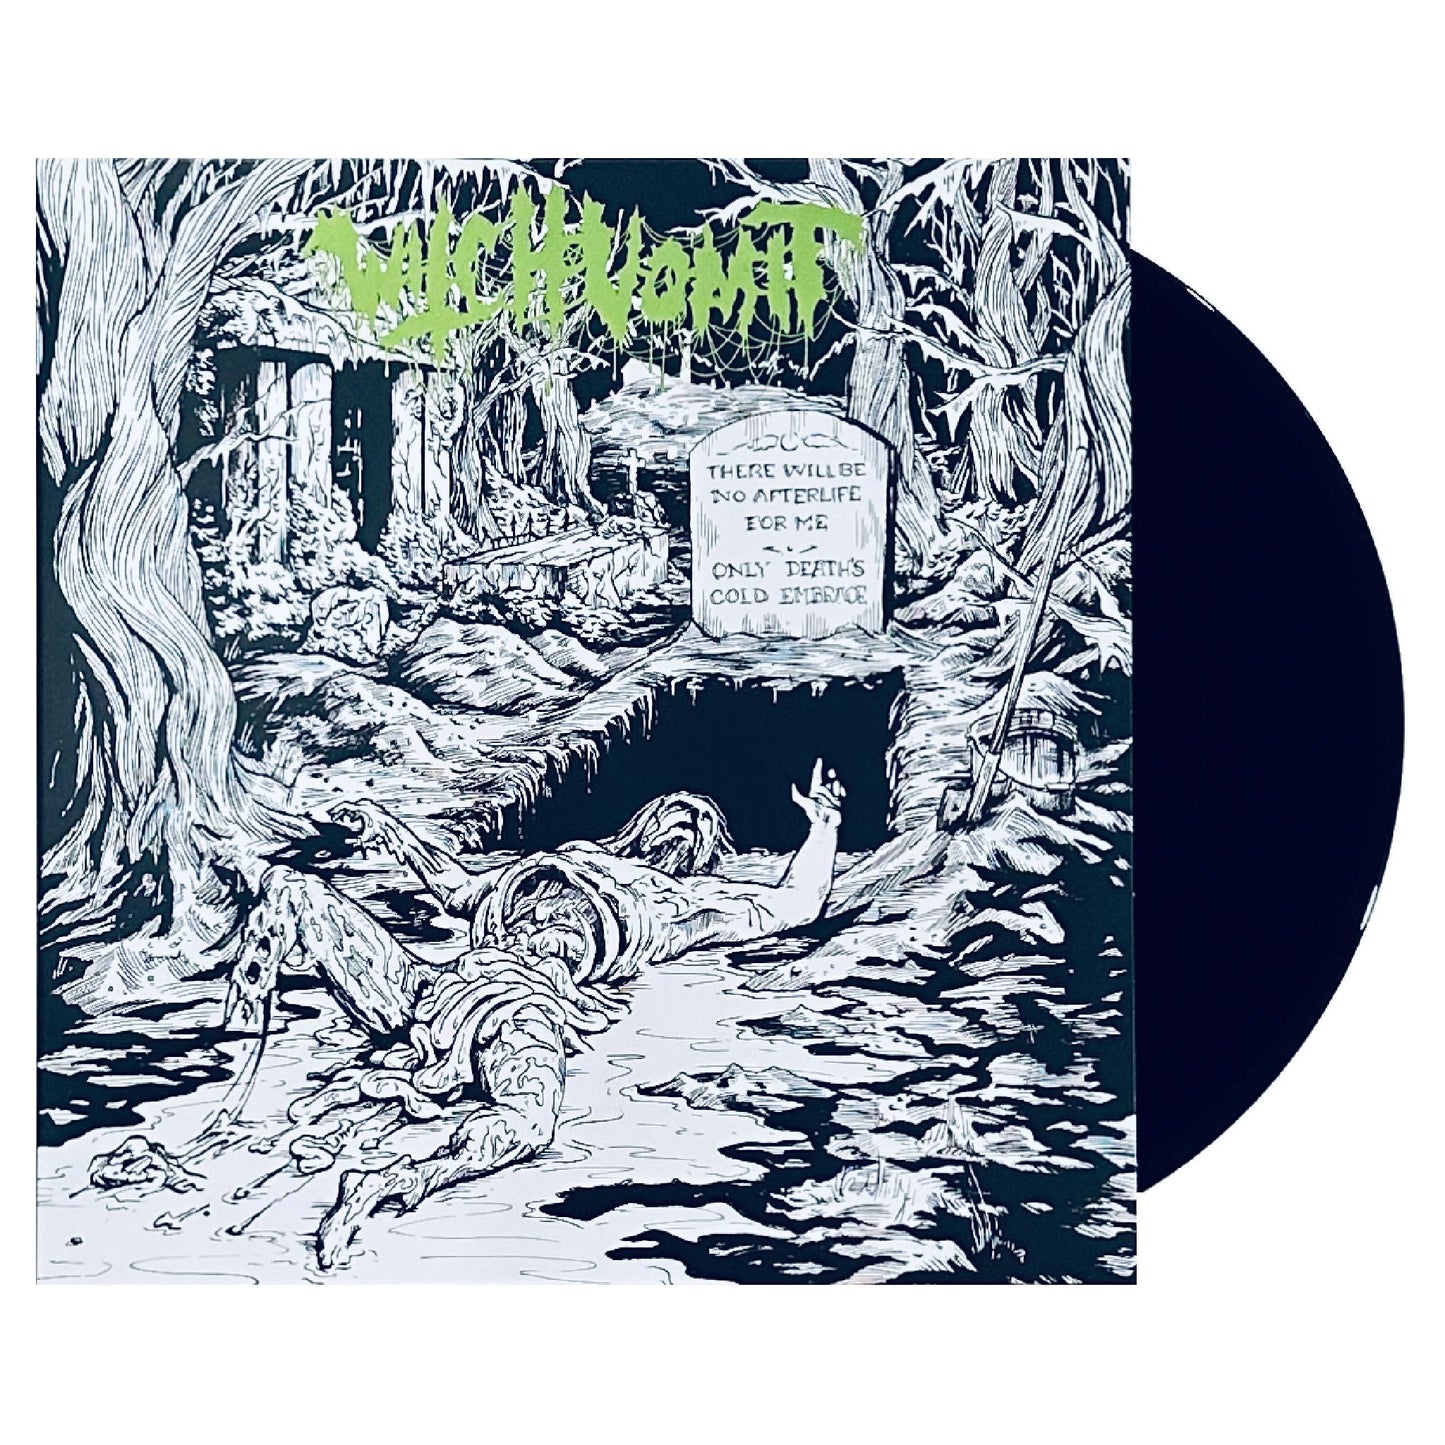 Witch Vomit - The Webs Of Horror 12" EP (color vinyl)